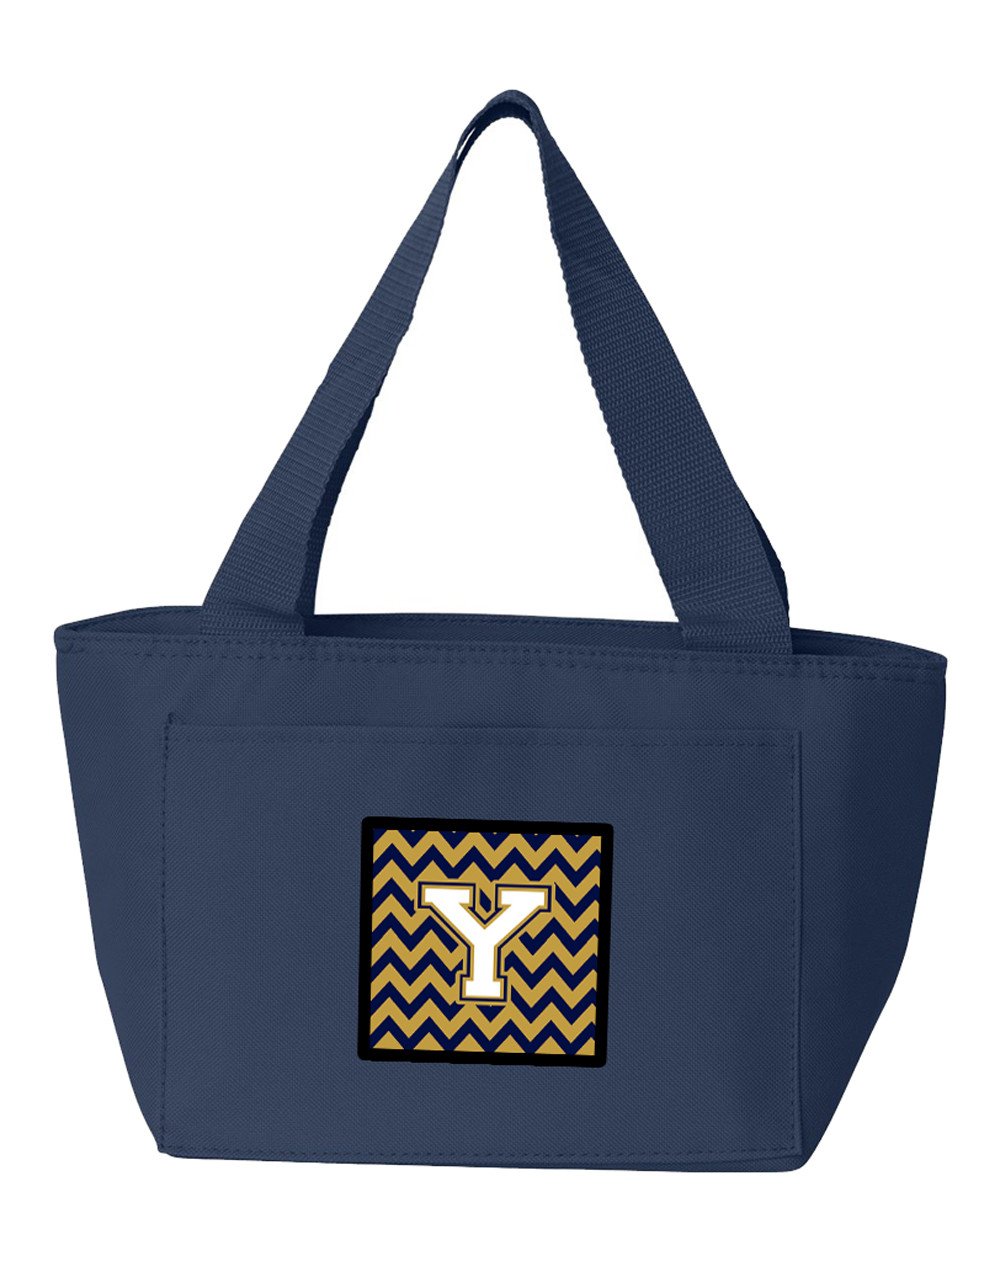 Letter Y Chevron Navy Blue and Gold Lunch Bag CJ1057-YNA-8808 by Caroline's Treasures